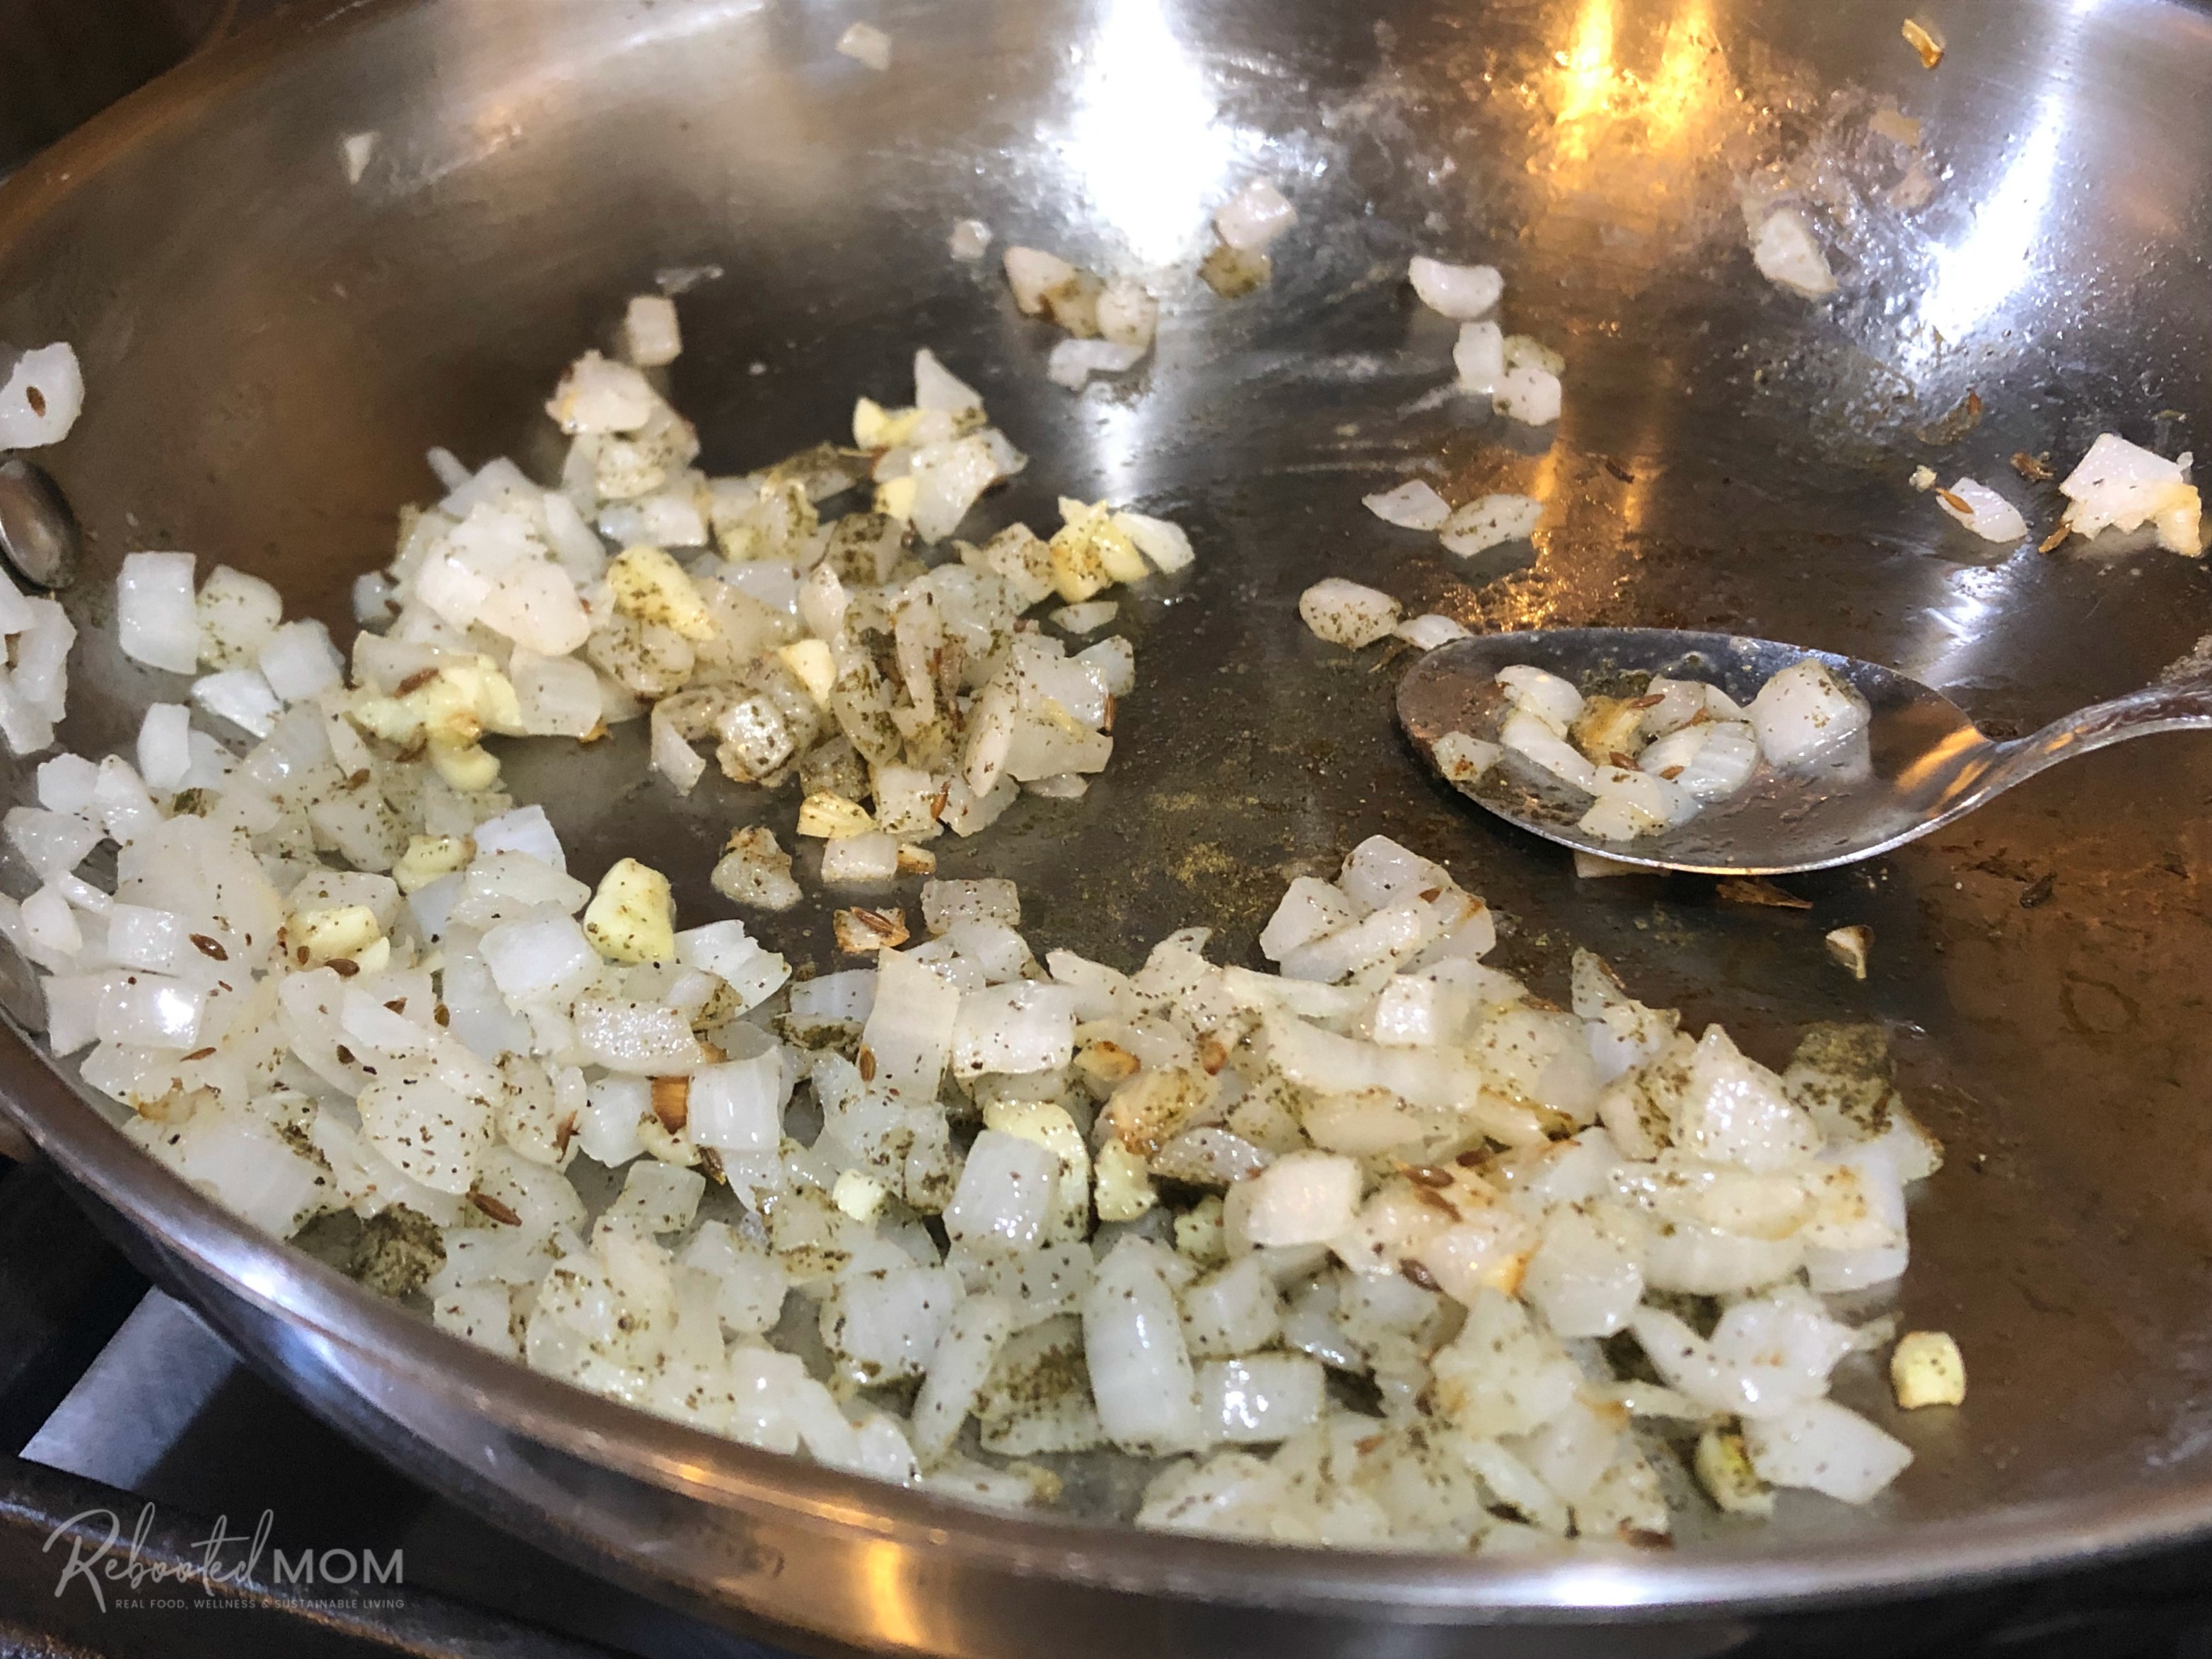 Onions, garlic and spices in a little skillet of oil on the stovetop